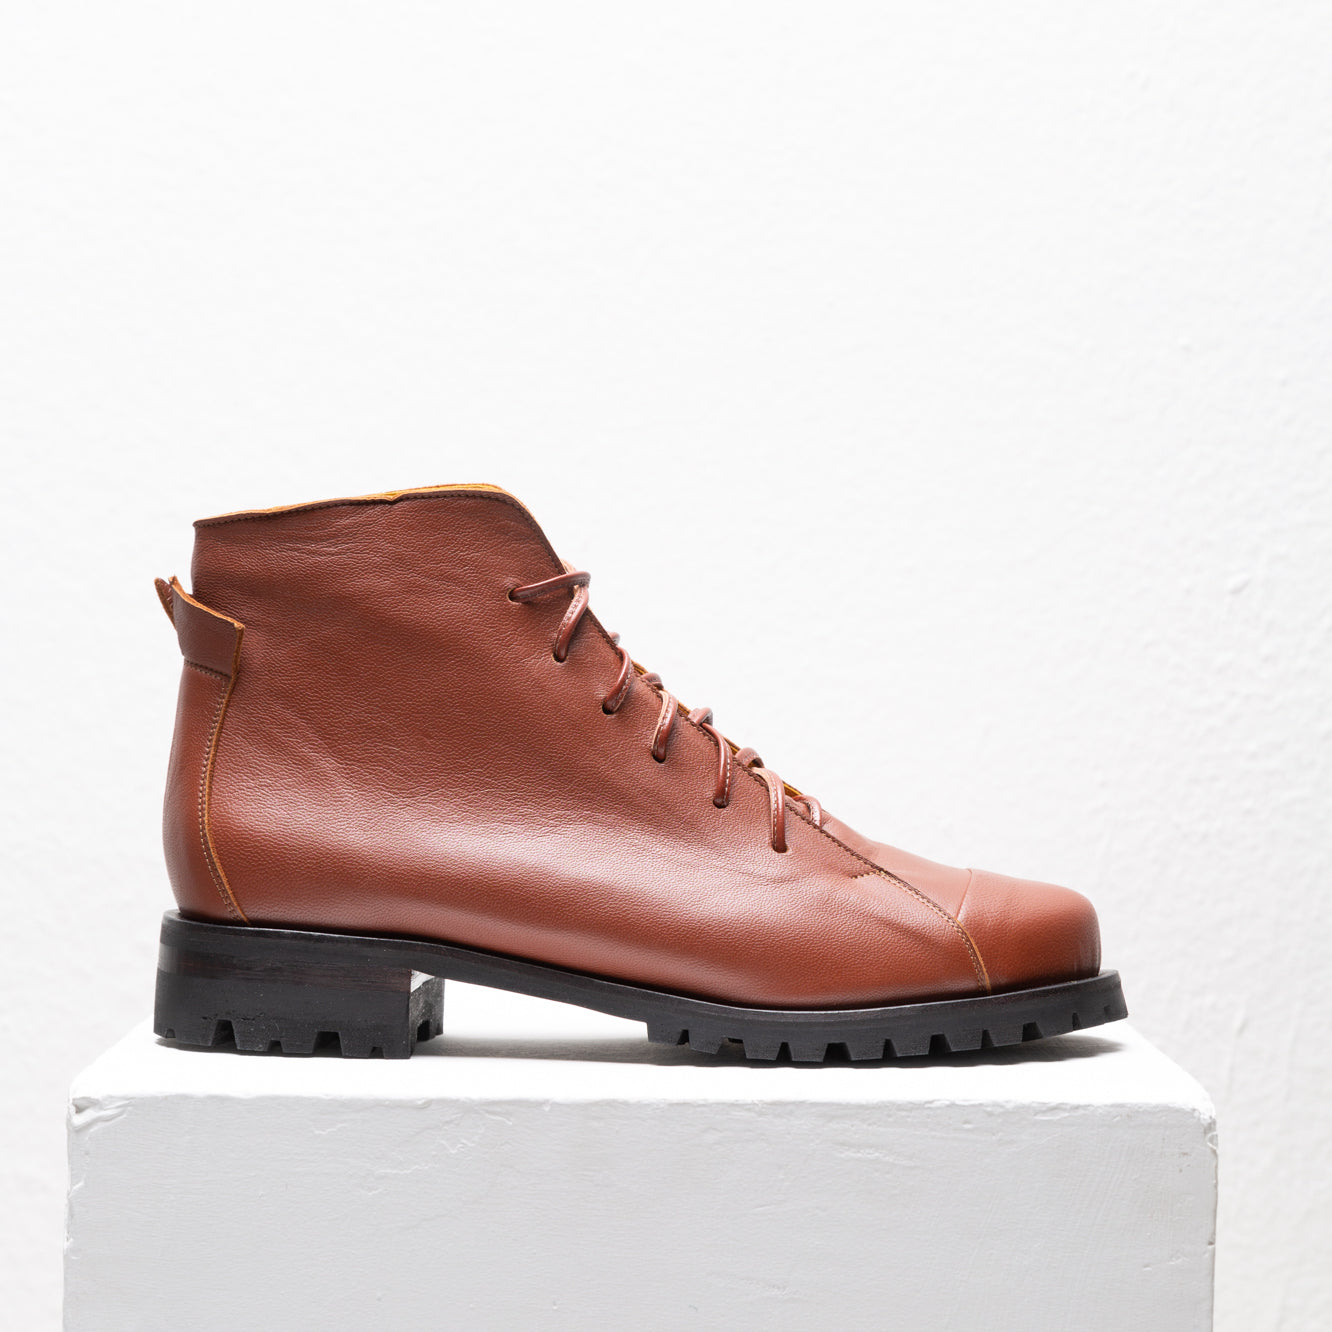 Hera Tan Ankle Boots